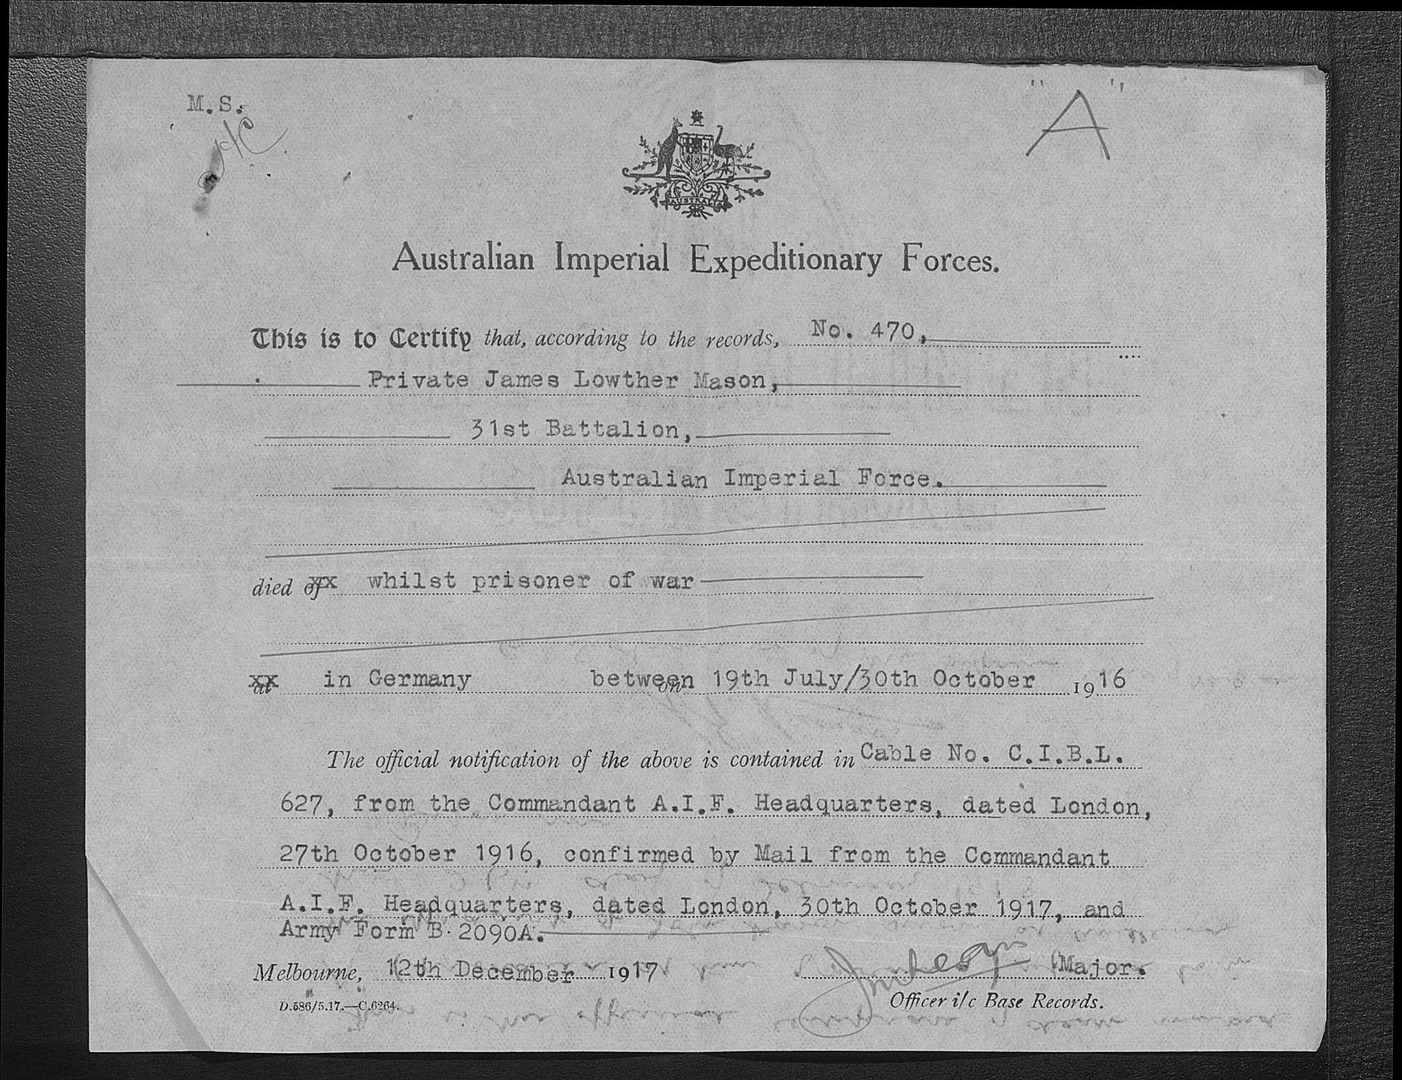 1002-New Zealand Born -- James Lowthe-image6png